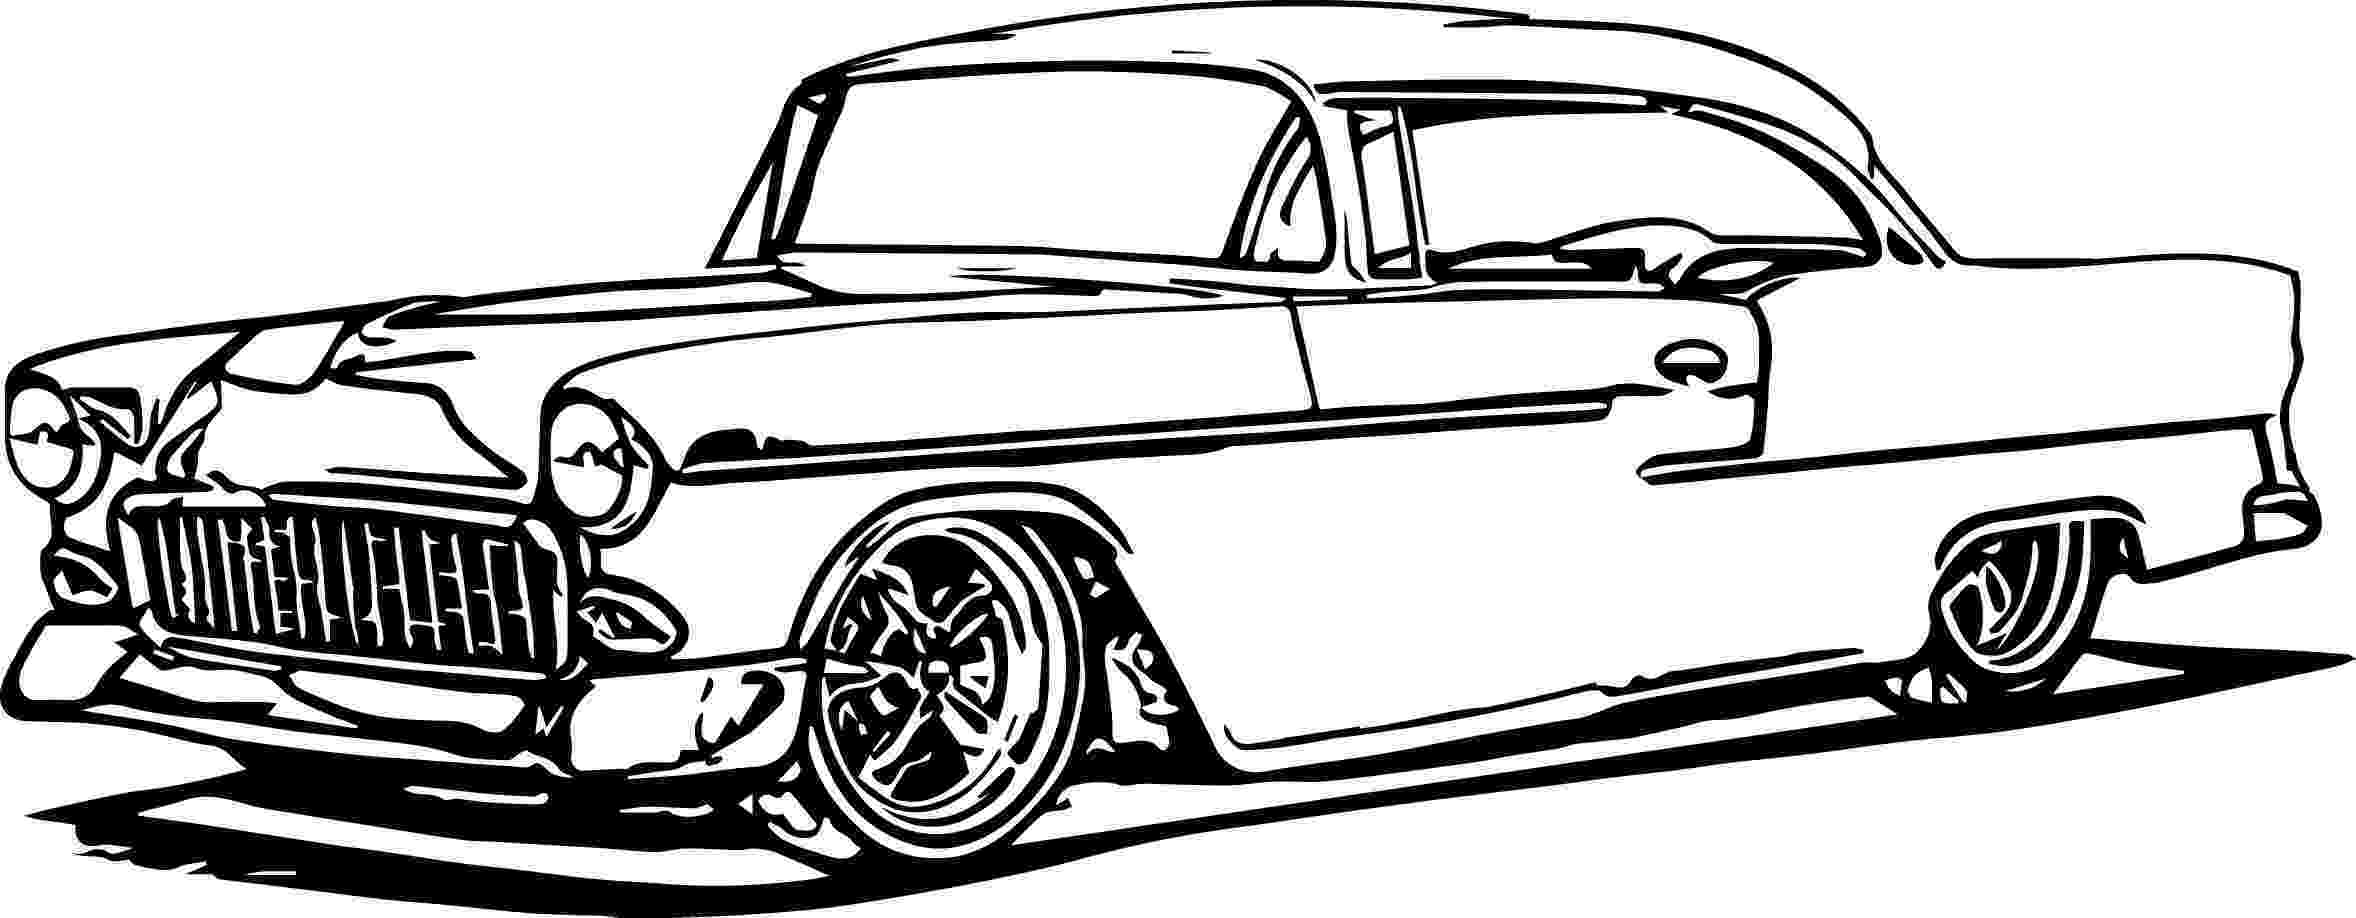 car coloring pages for adults top 25 free printable race car coloring pages online for pages coloring car adults 